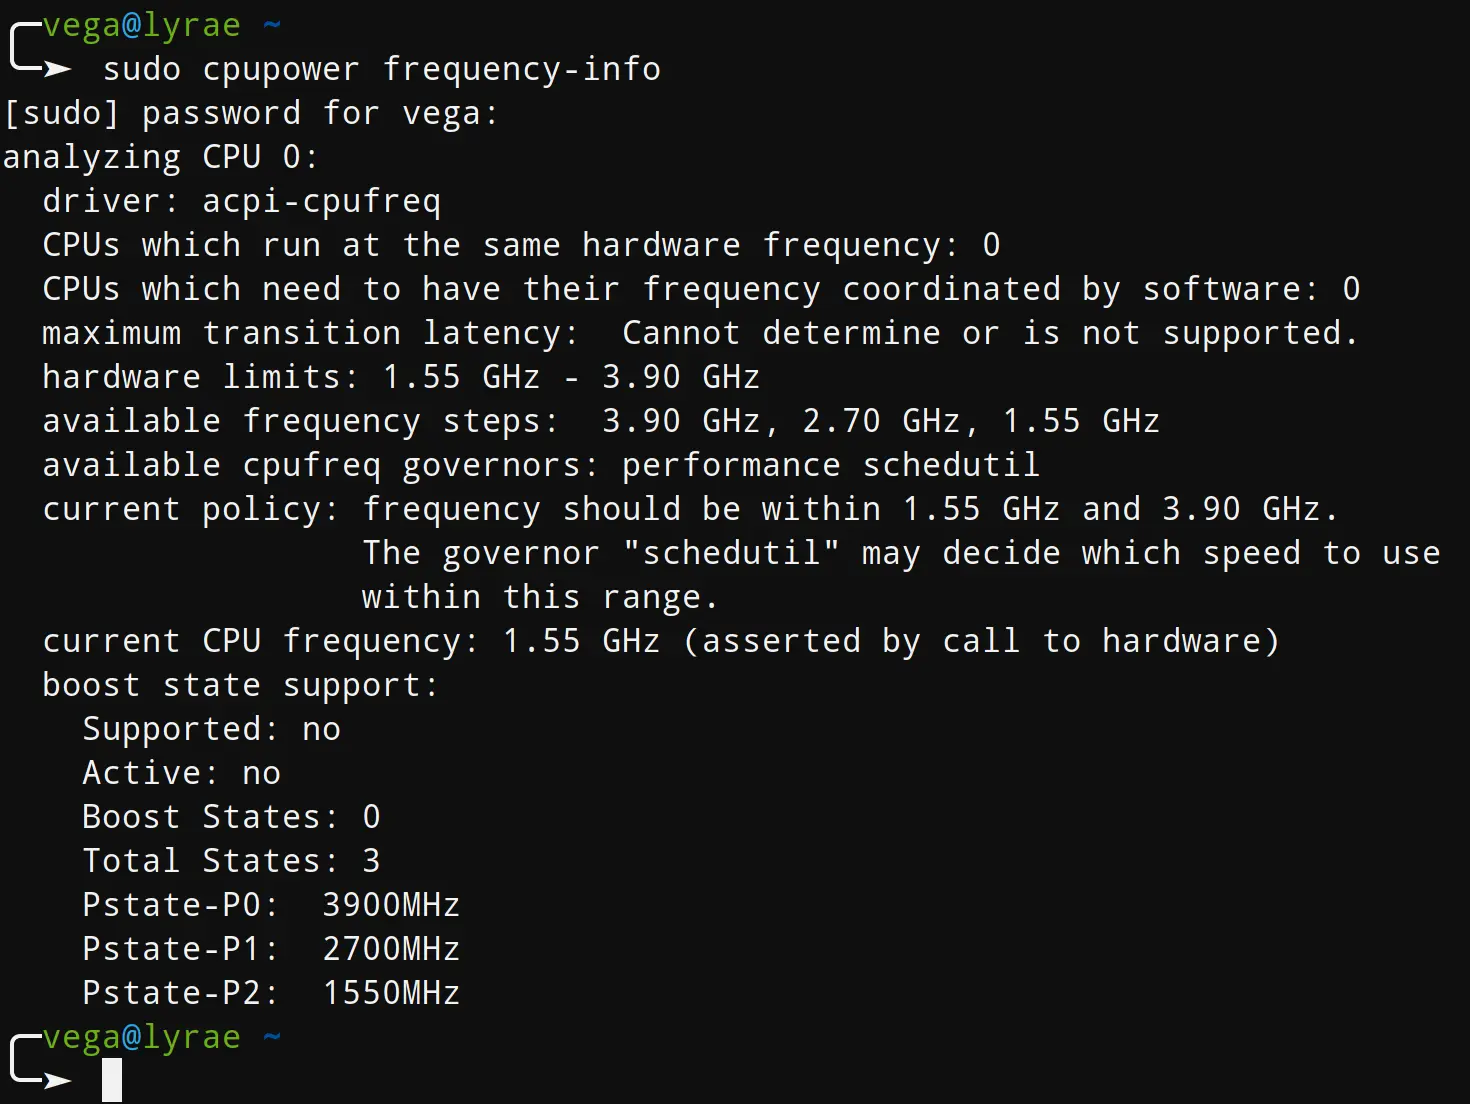 sudo cpupower frequency-info